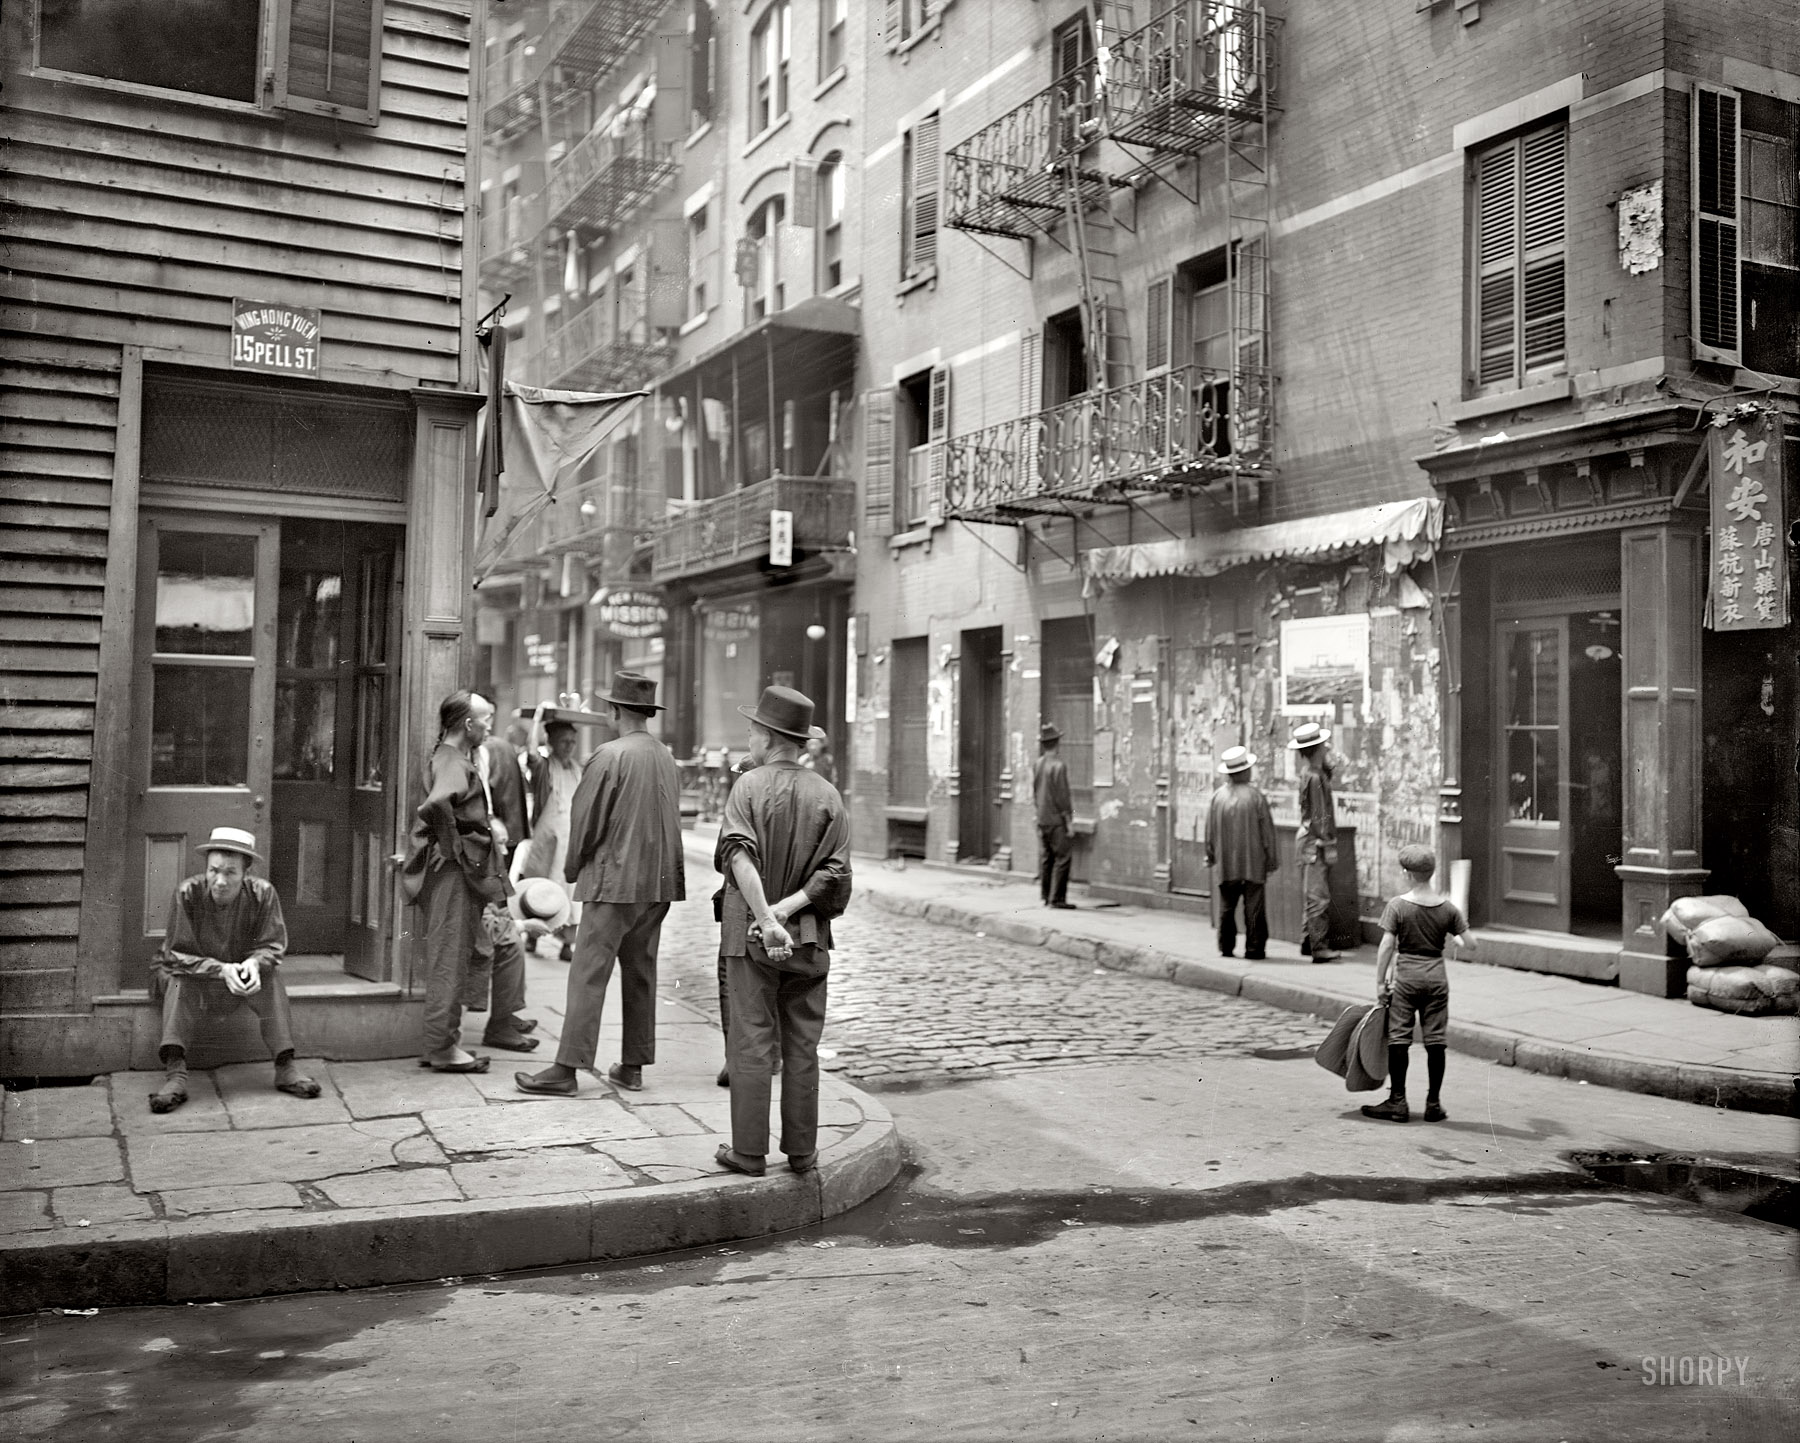 New York circa 1900. "In Chinatown, Pell Street." Photo by Byron. 8x10 inch dry plate glass negative, Detroit Publishing Company. View full size.